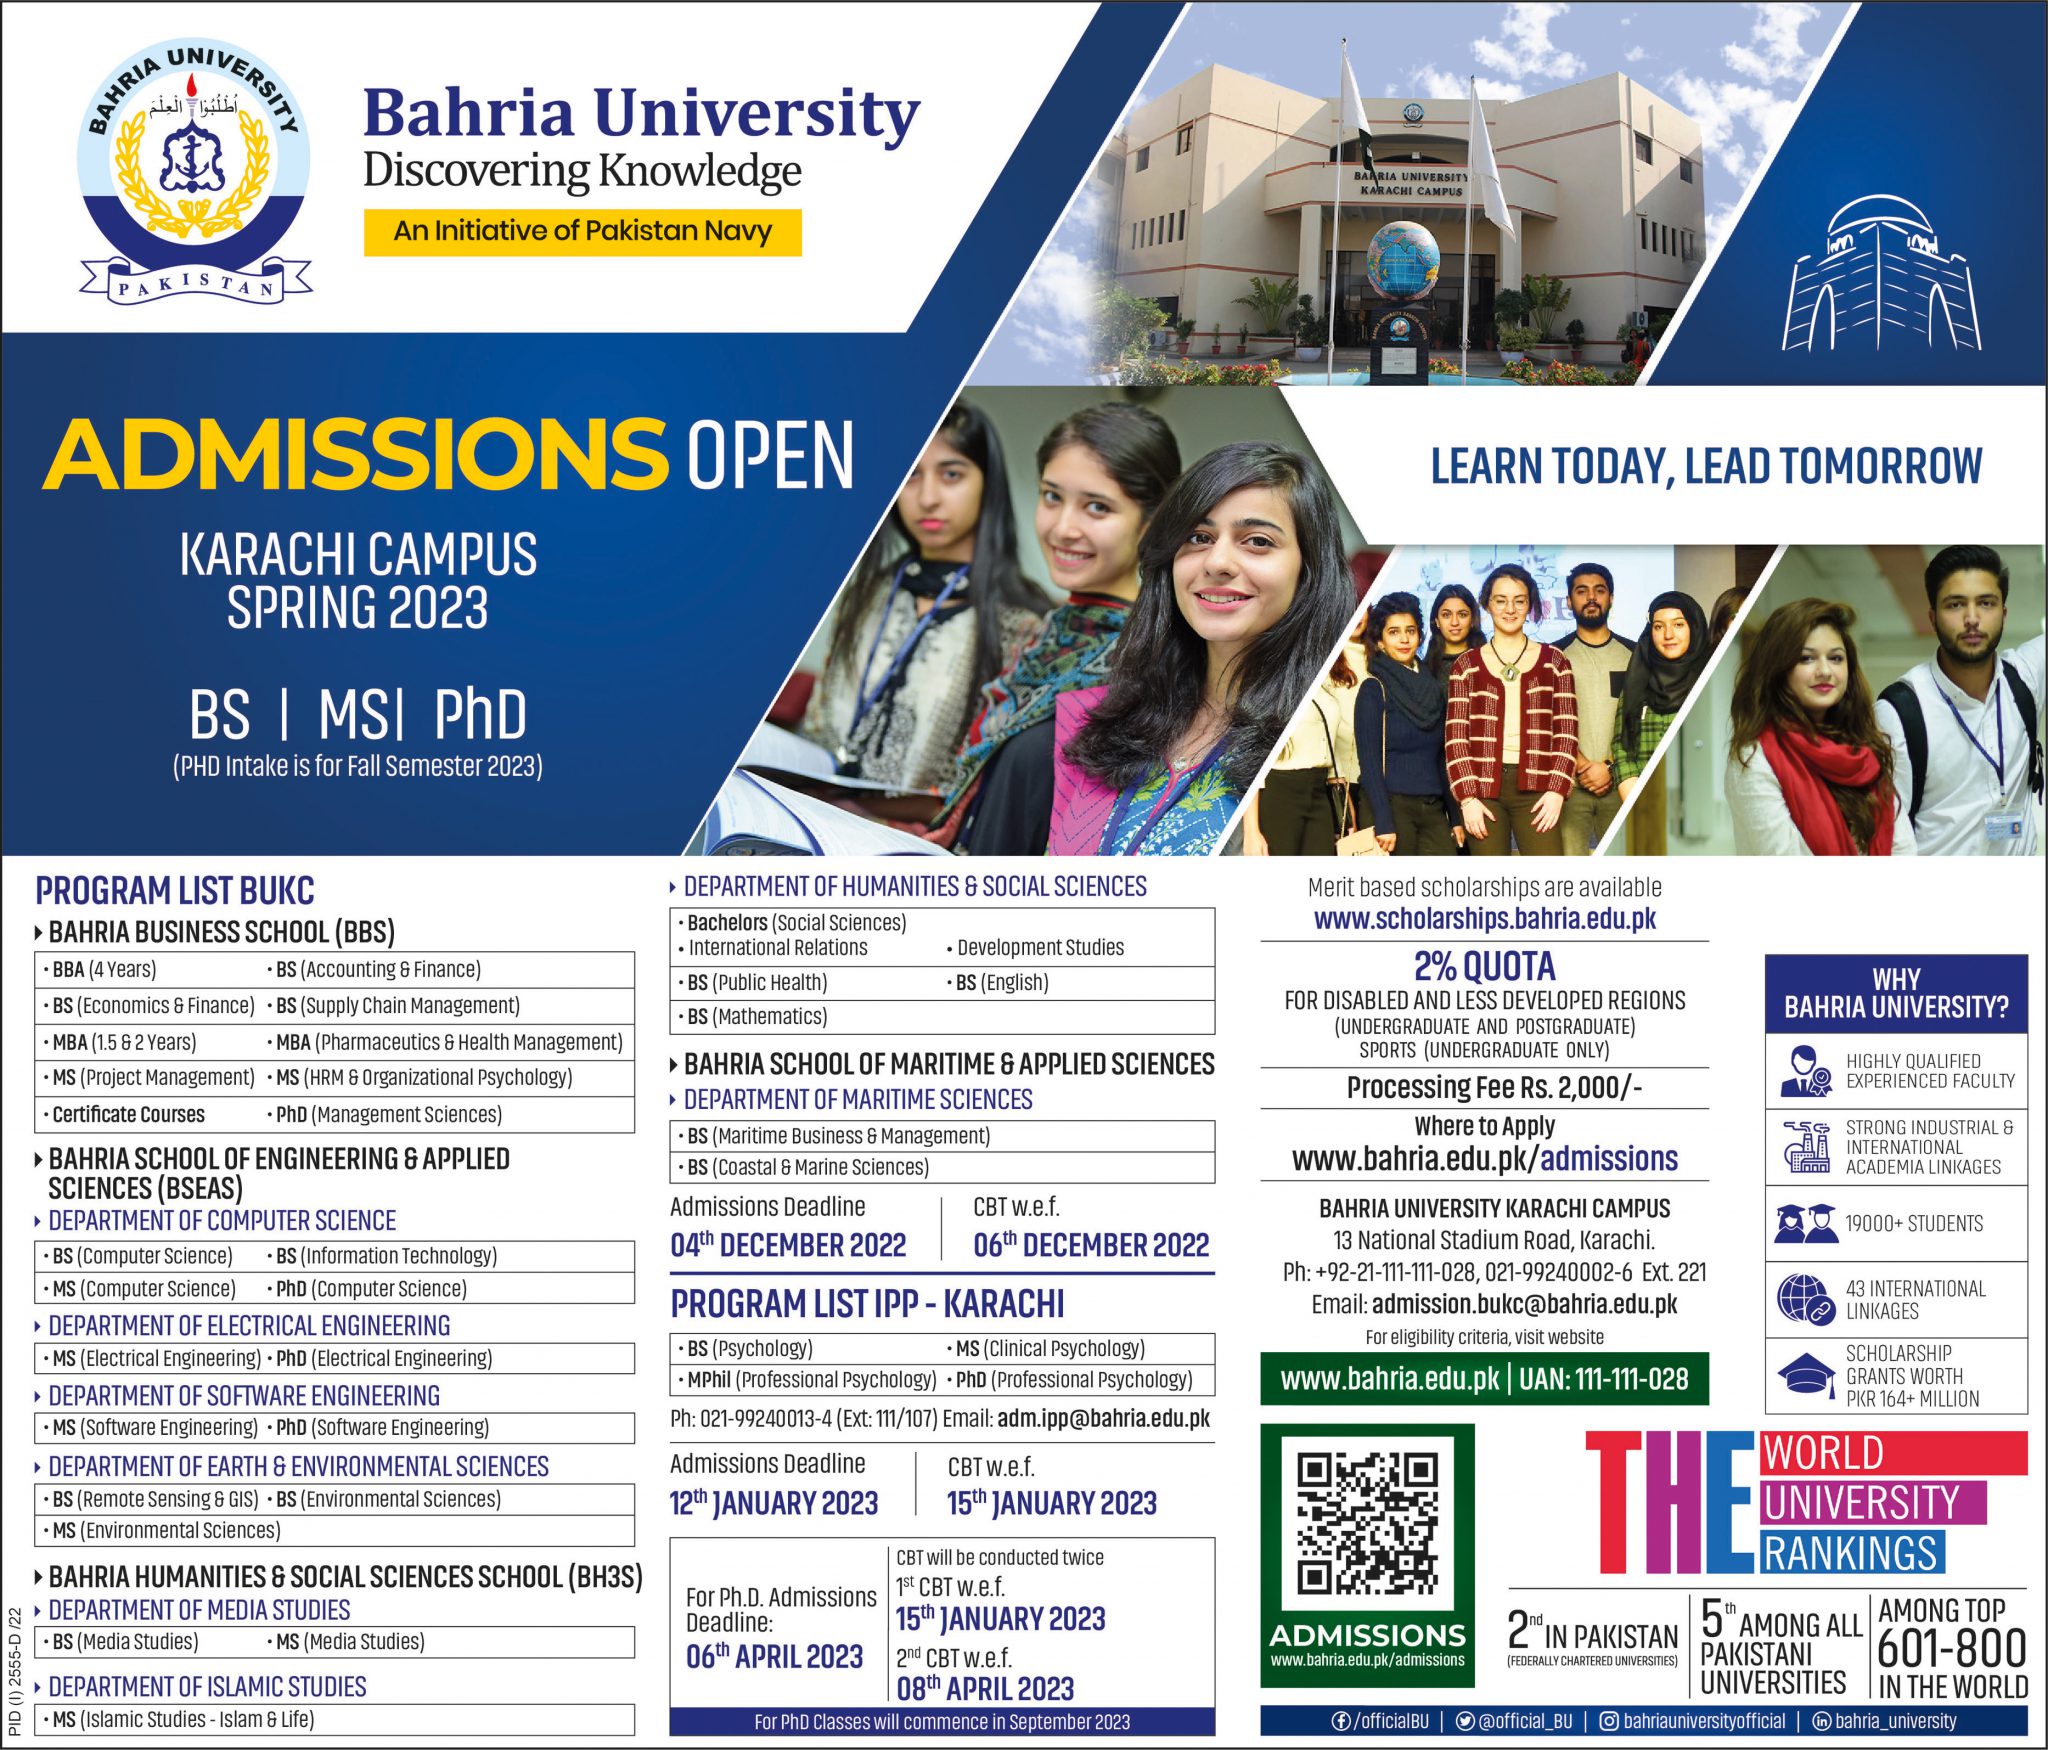 Spring 2023 Admissions are open at Bahria University Islamabad, H-11 Campus!